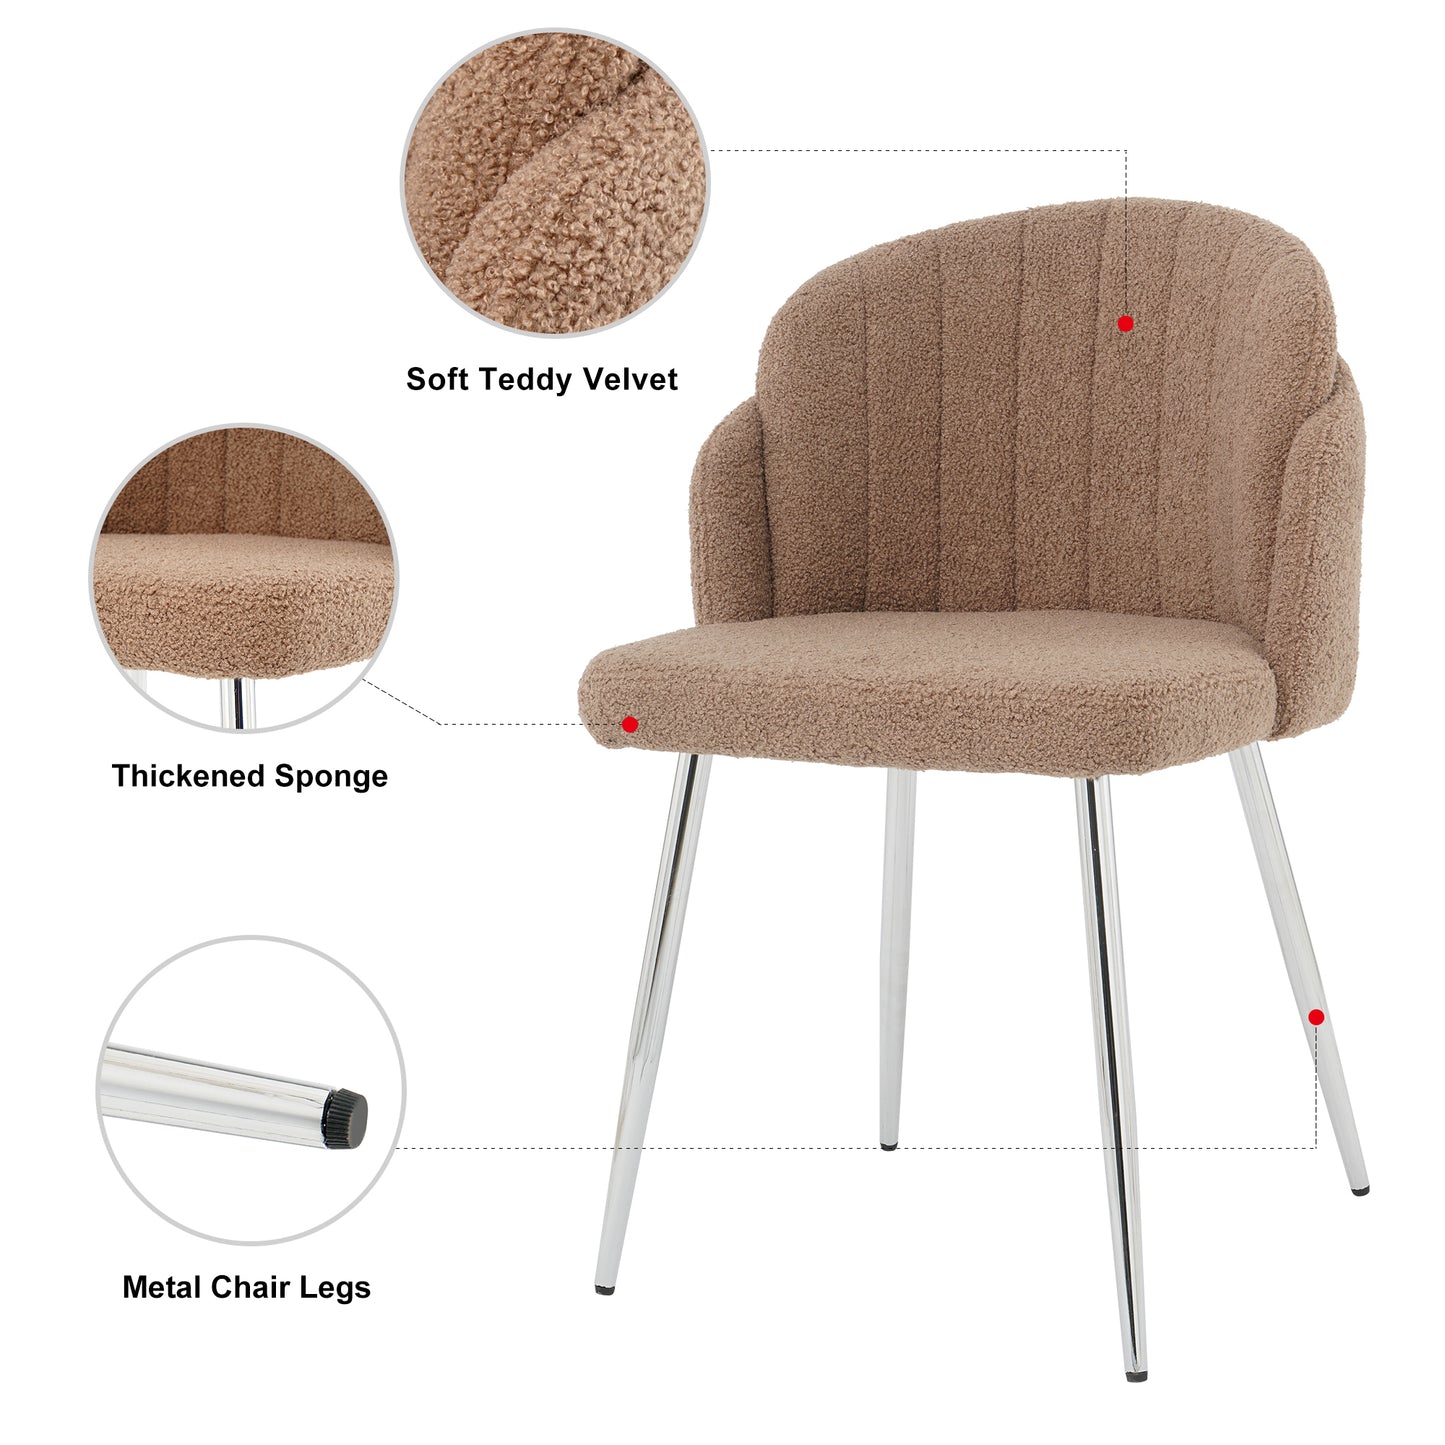 Modern simple brown teddy fleece dining chair Fabric Upholstered Chairs home bedroom stool back dressing chair chrome metal legs(set of 2) - Enova Luxe Home Store